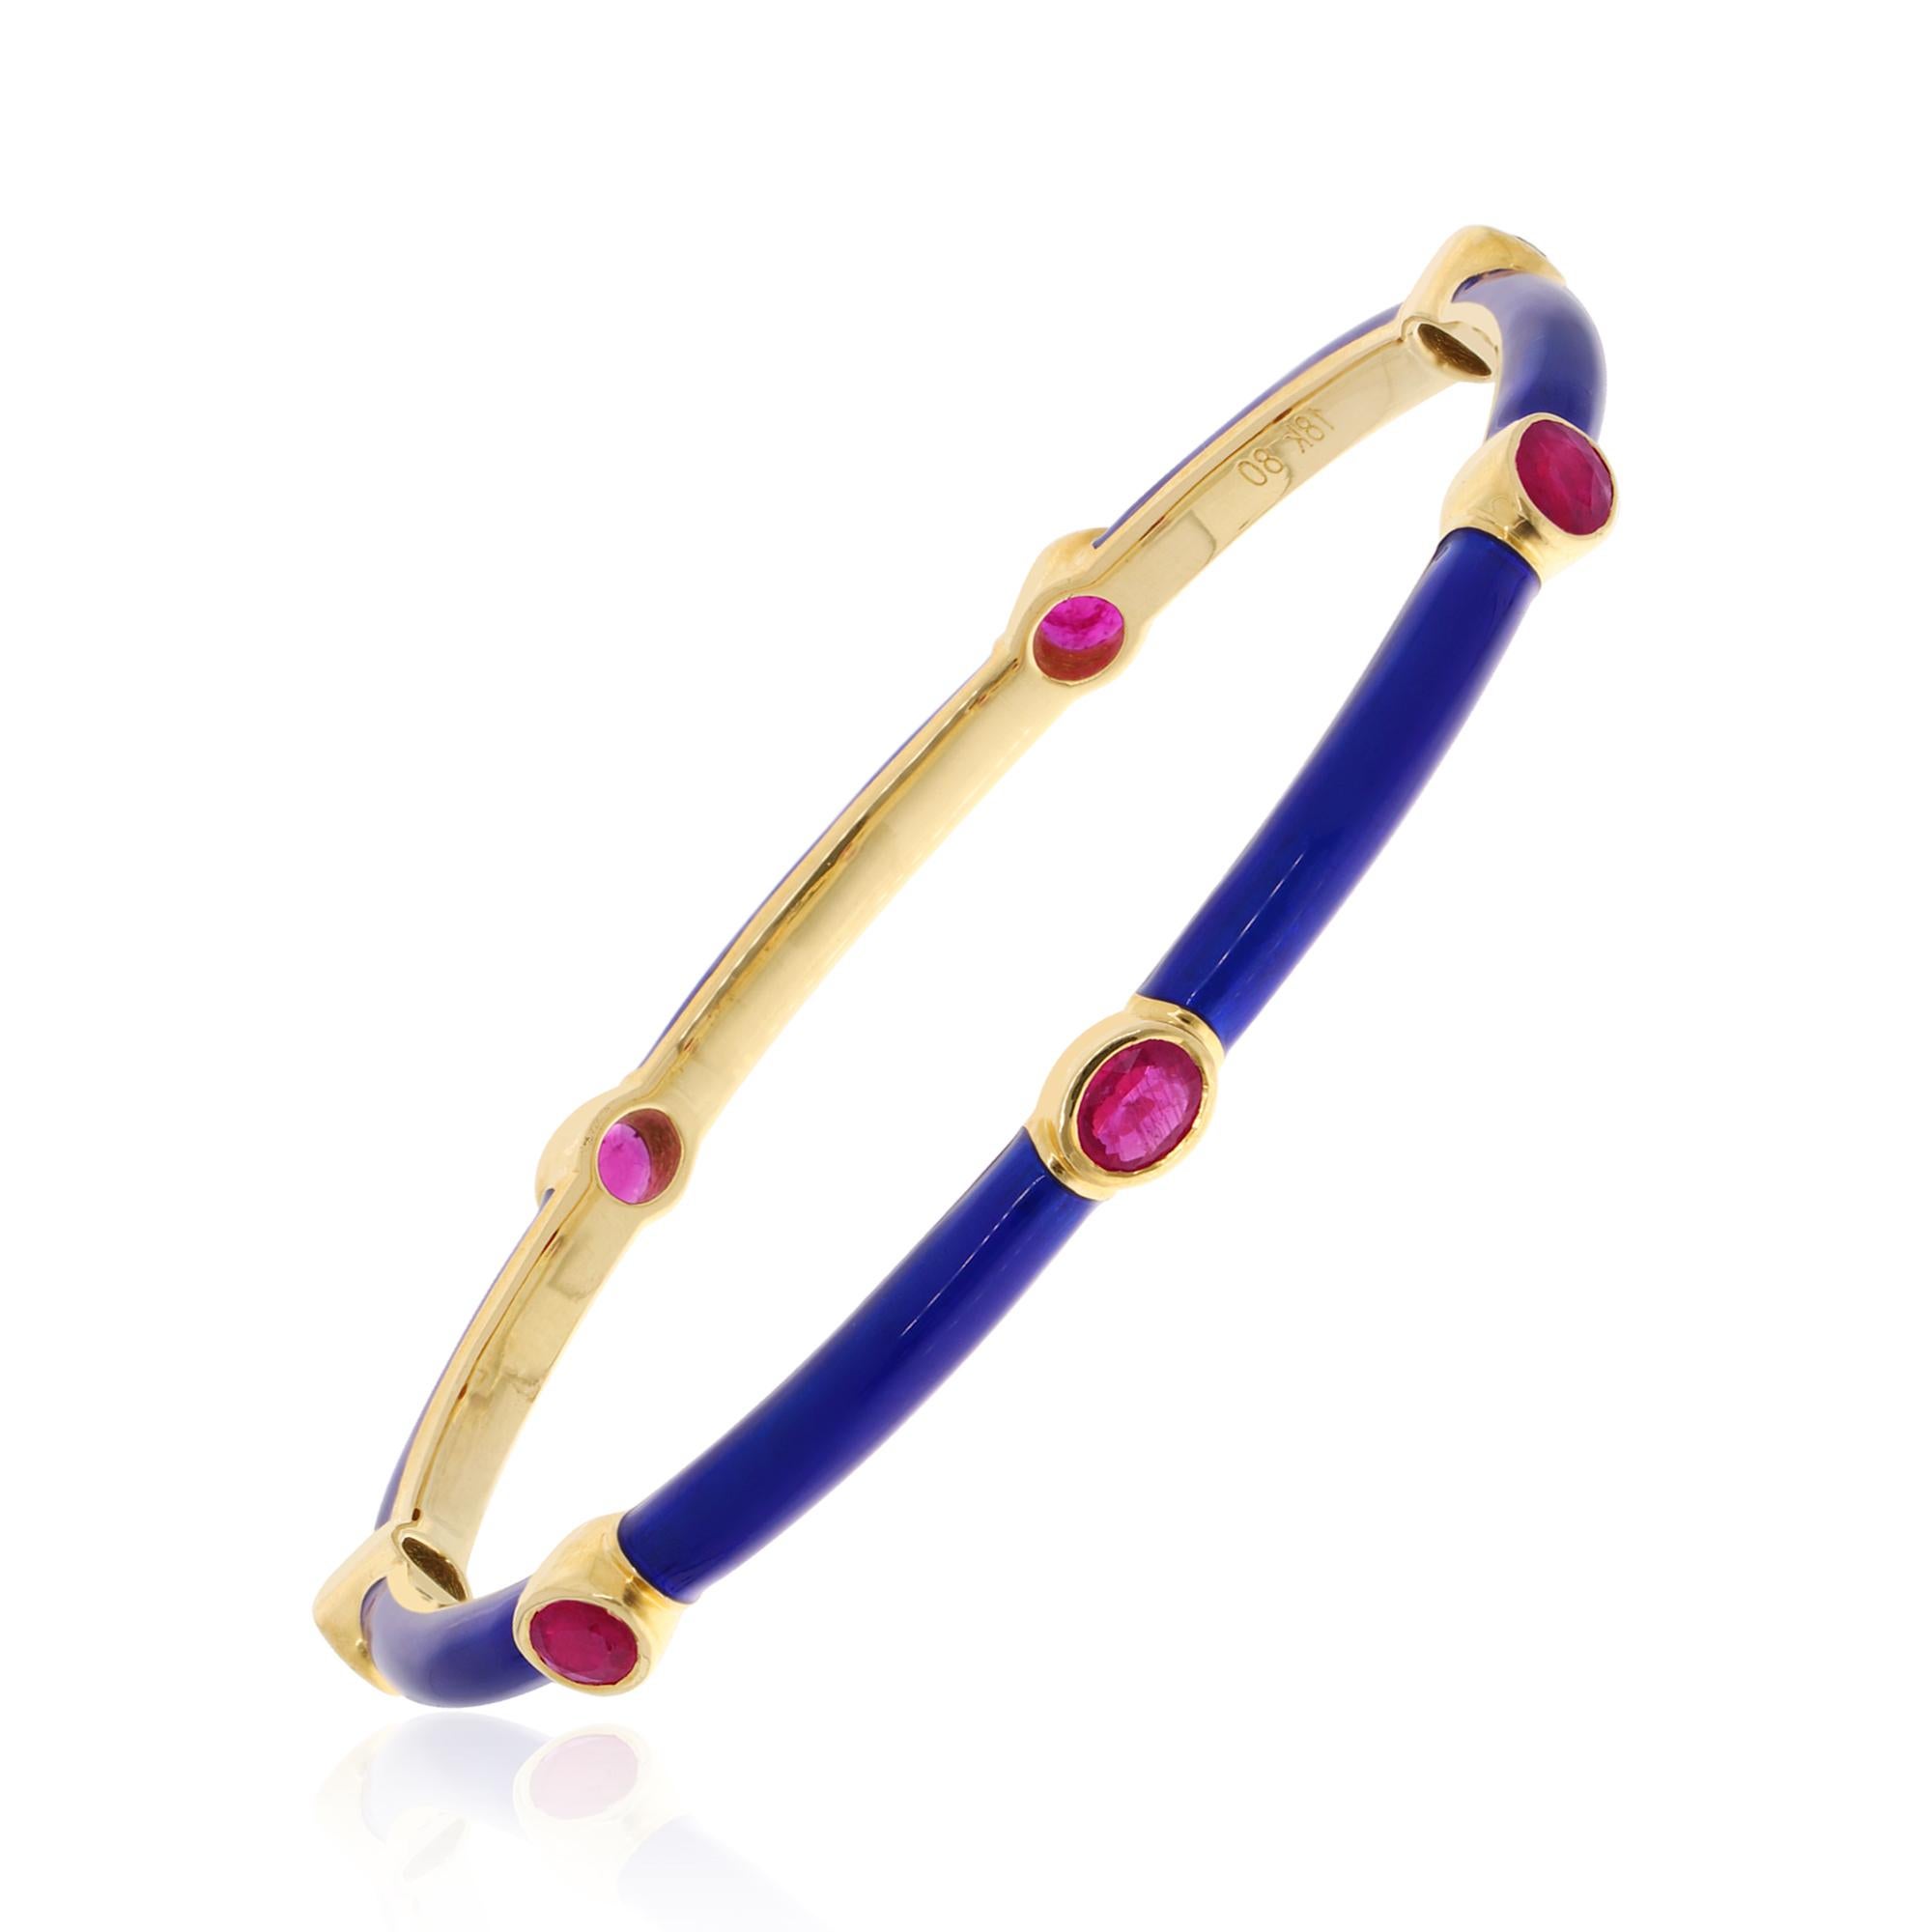 The focal point of this bracelet, the oval ruby gemstone, is expertly set within a bezel setting, allowing its natural beauty to shine with effortless elegance. With a weight of 2.3 carats, this ruby exudes luxury and sophistication, making it a